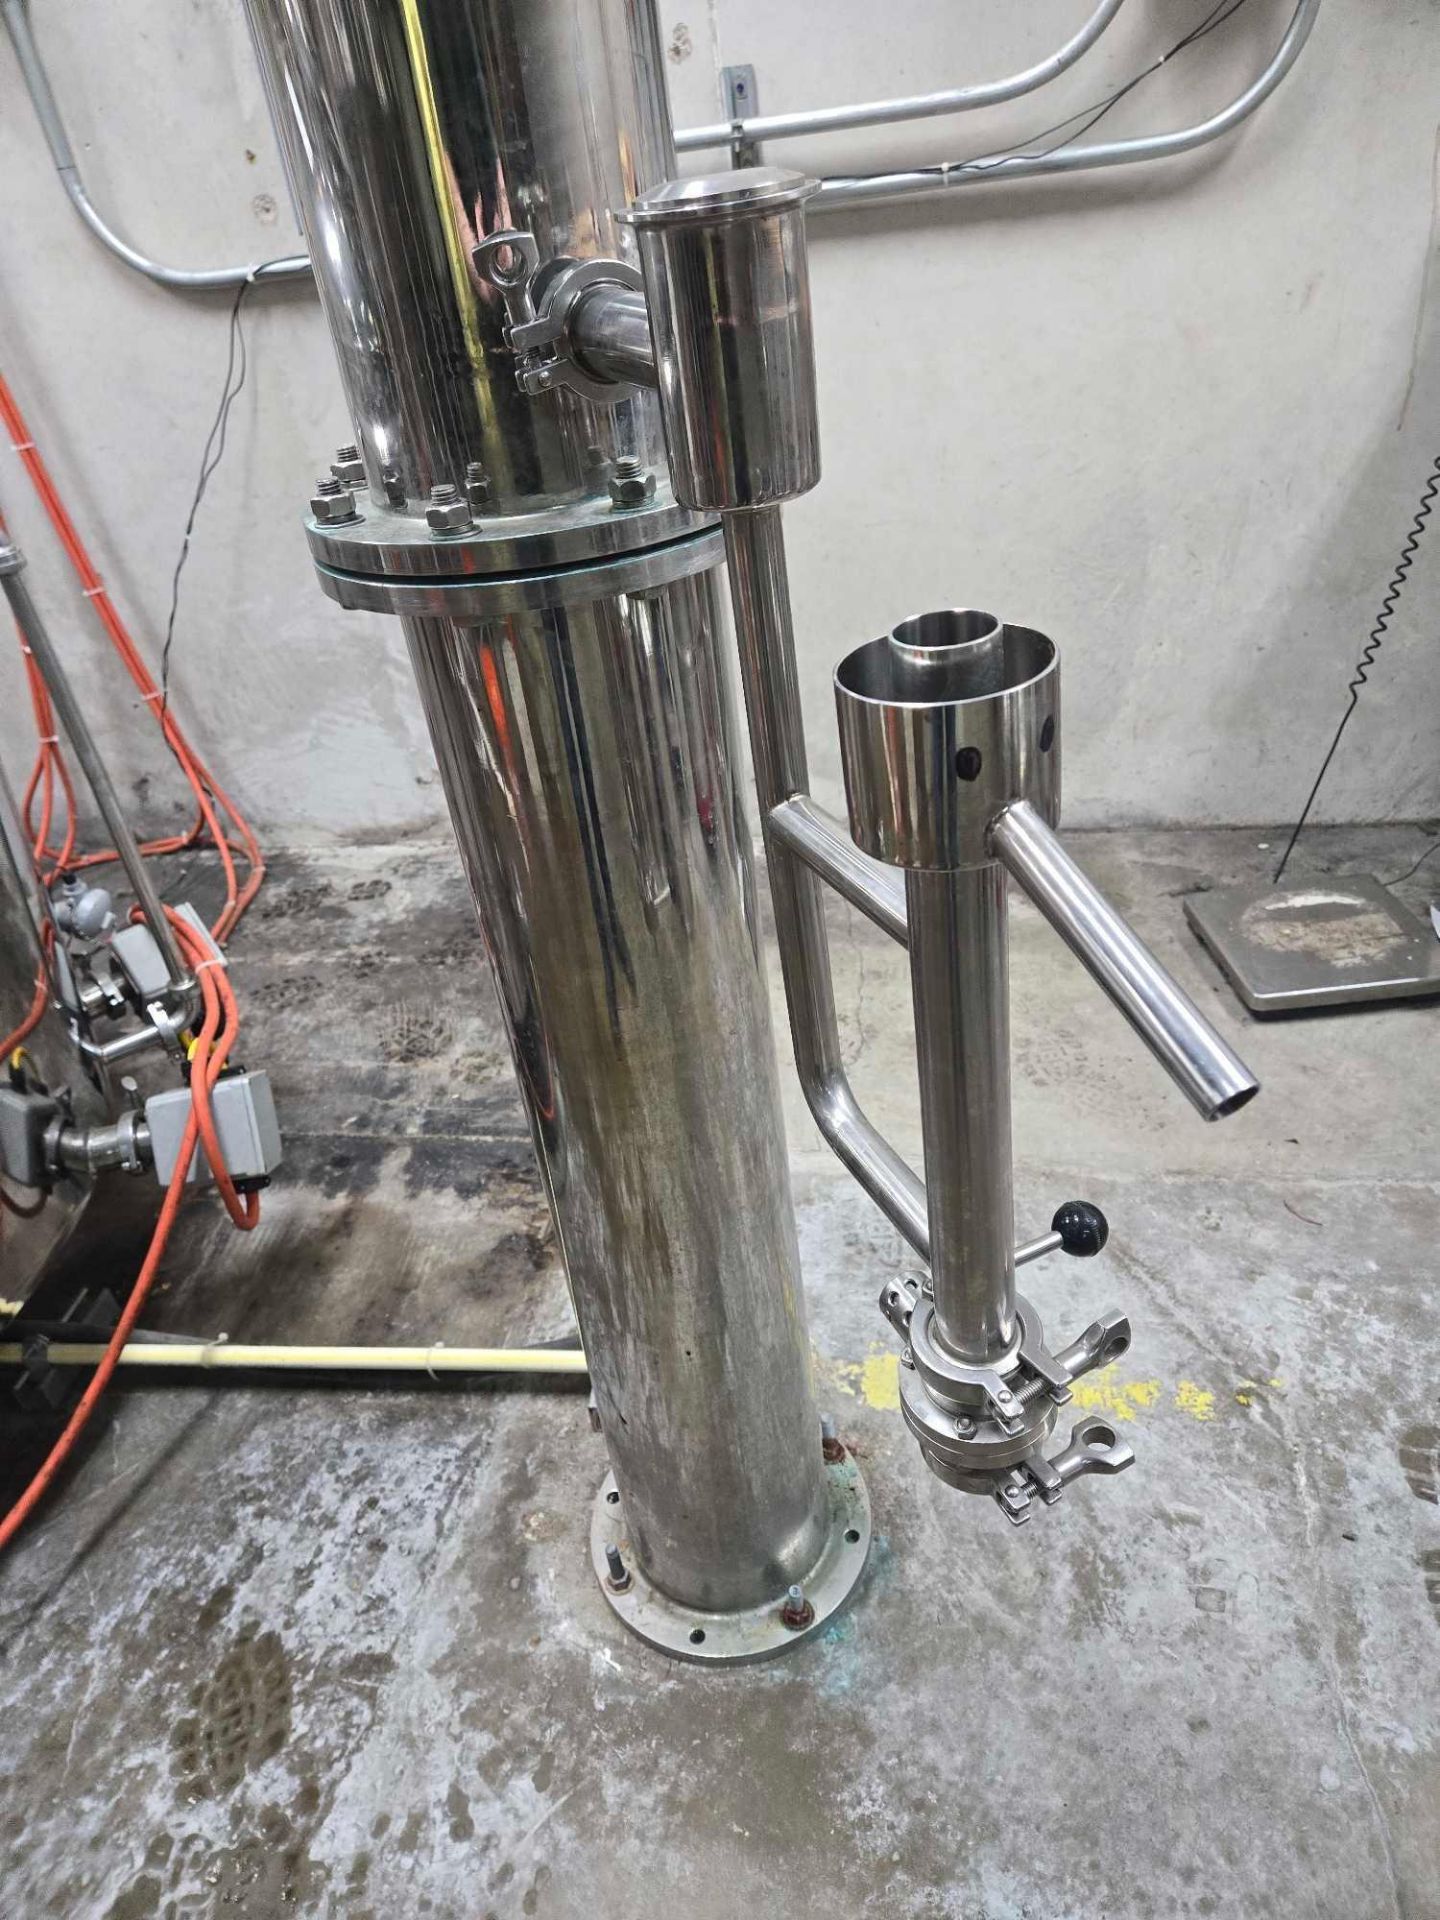 STAINLESS STEEL ELECTRIC POT STILL W/ COPPER ALEMBIC & CONDENSER APPROX. 300 GALLONS - Image 22 of 23